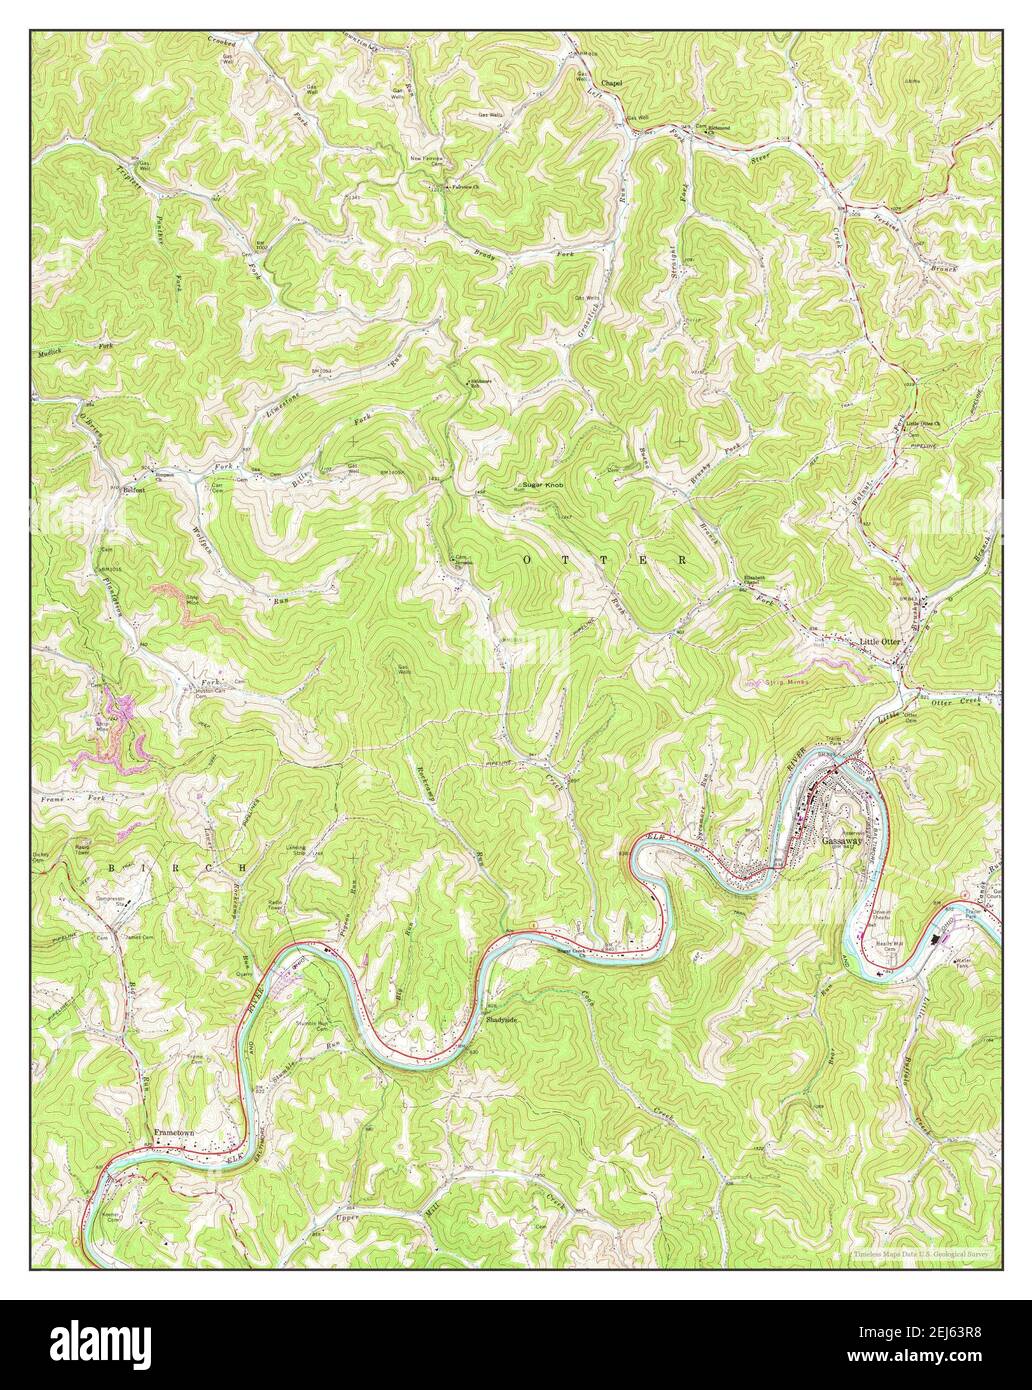 Gassaway, West Virginia, map 1965, 1:24000, United States of America by Timeless Maps, data U.S. Geological Survey Stock Photo